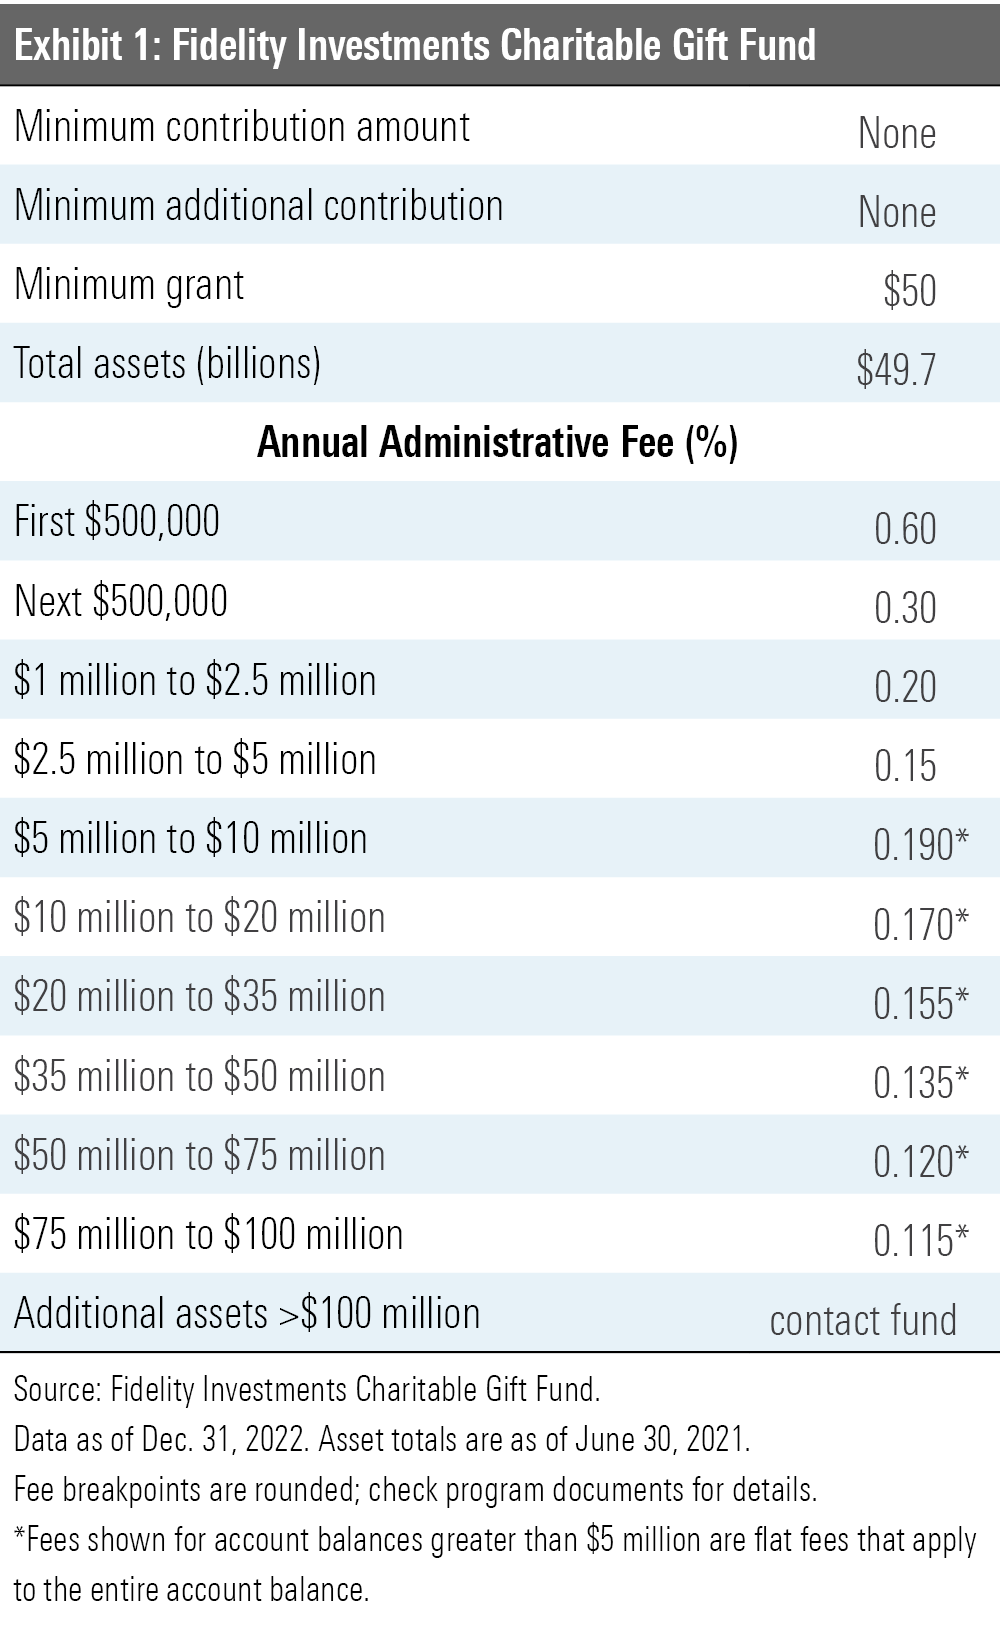 A table showing key facts about Fidelity Investments Charitable Gift Fund, including minimum contribution amounts and administrative fees.